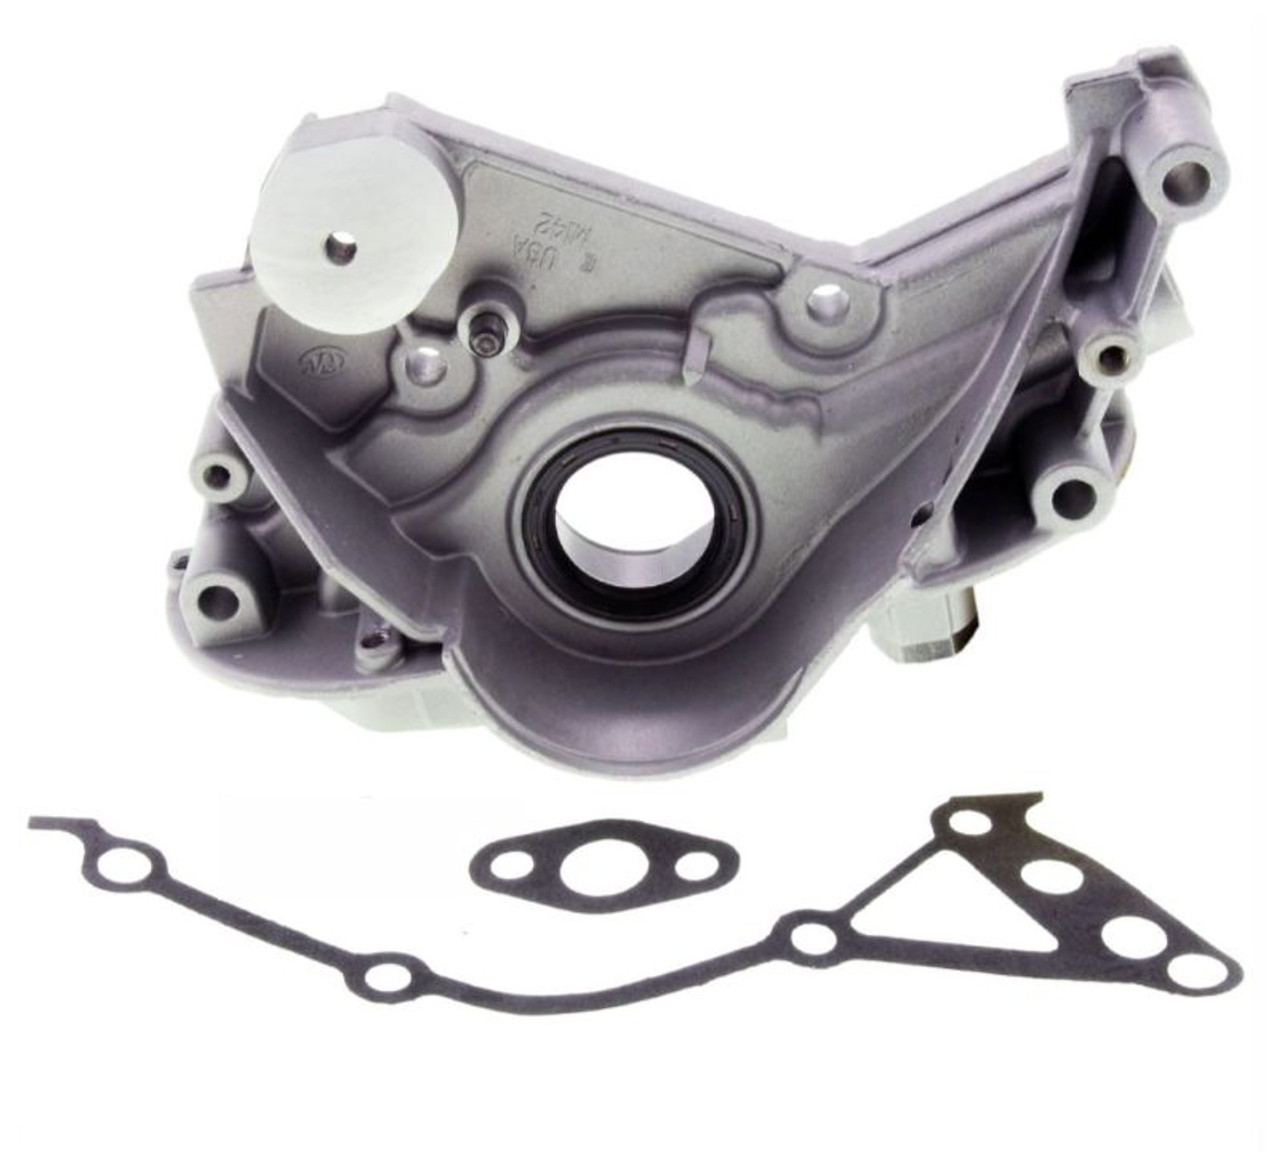 Oil Pump - 1996 Plymouth Voyager 3.0L (EP142.H80)